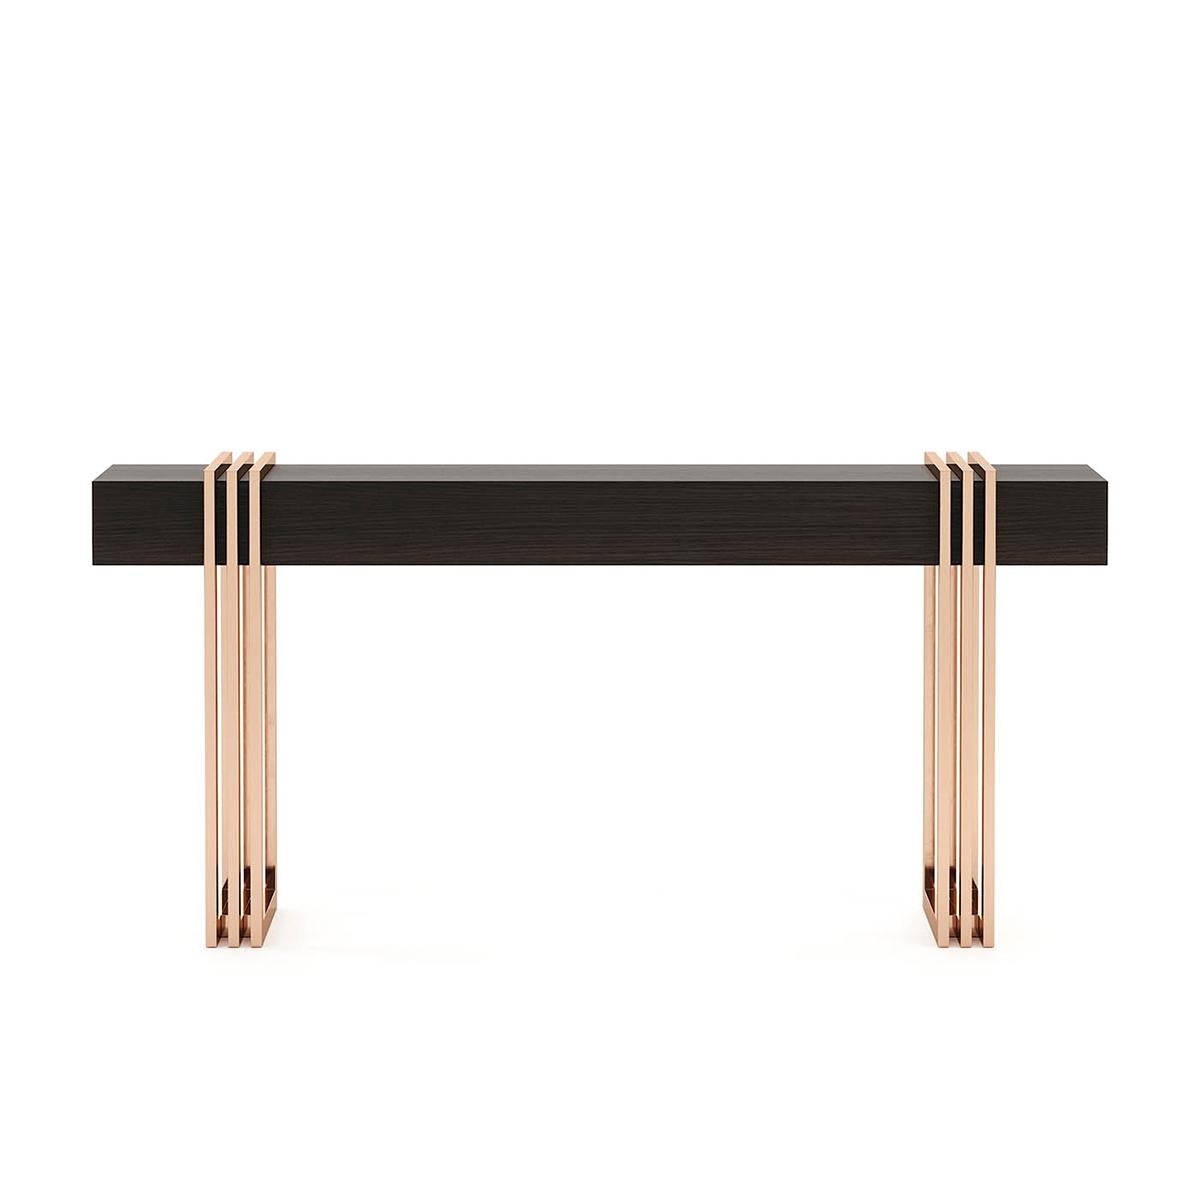 Console table reed with solid matte eucalyptus wood
top in smocked matte finish and with polished stainless
steel base in copper finish.
Also available with other wood finishes and other
stainless steel finishes on request.